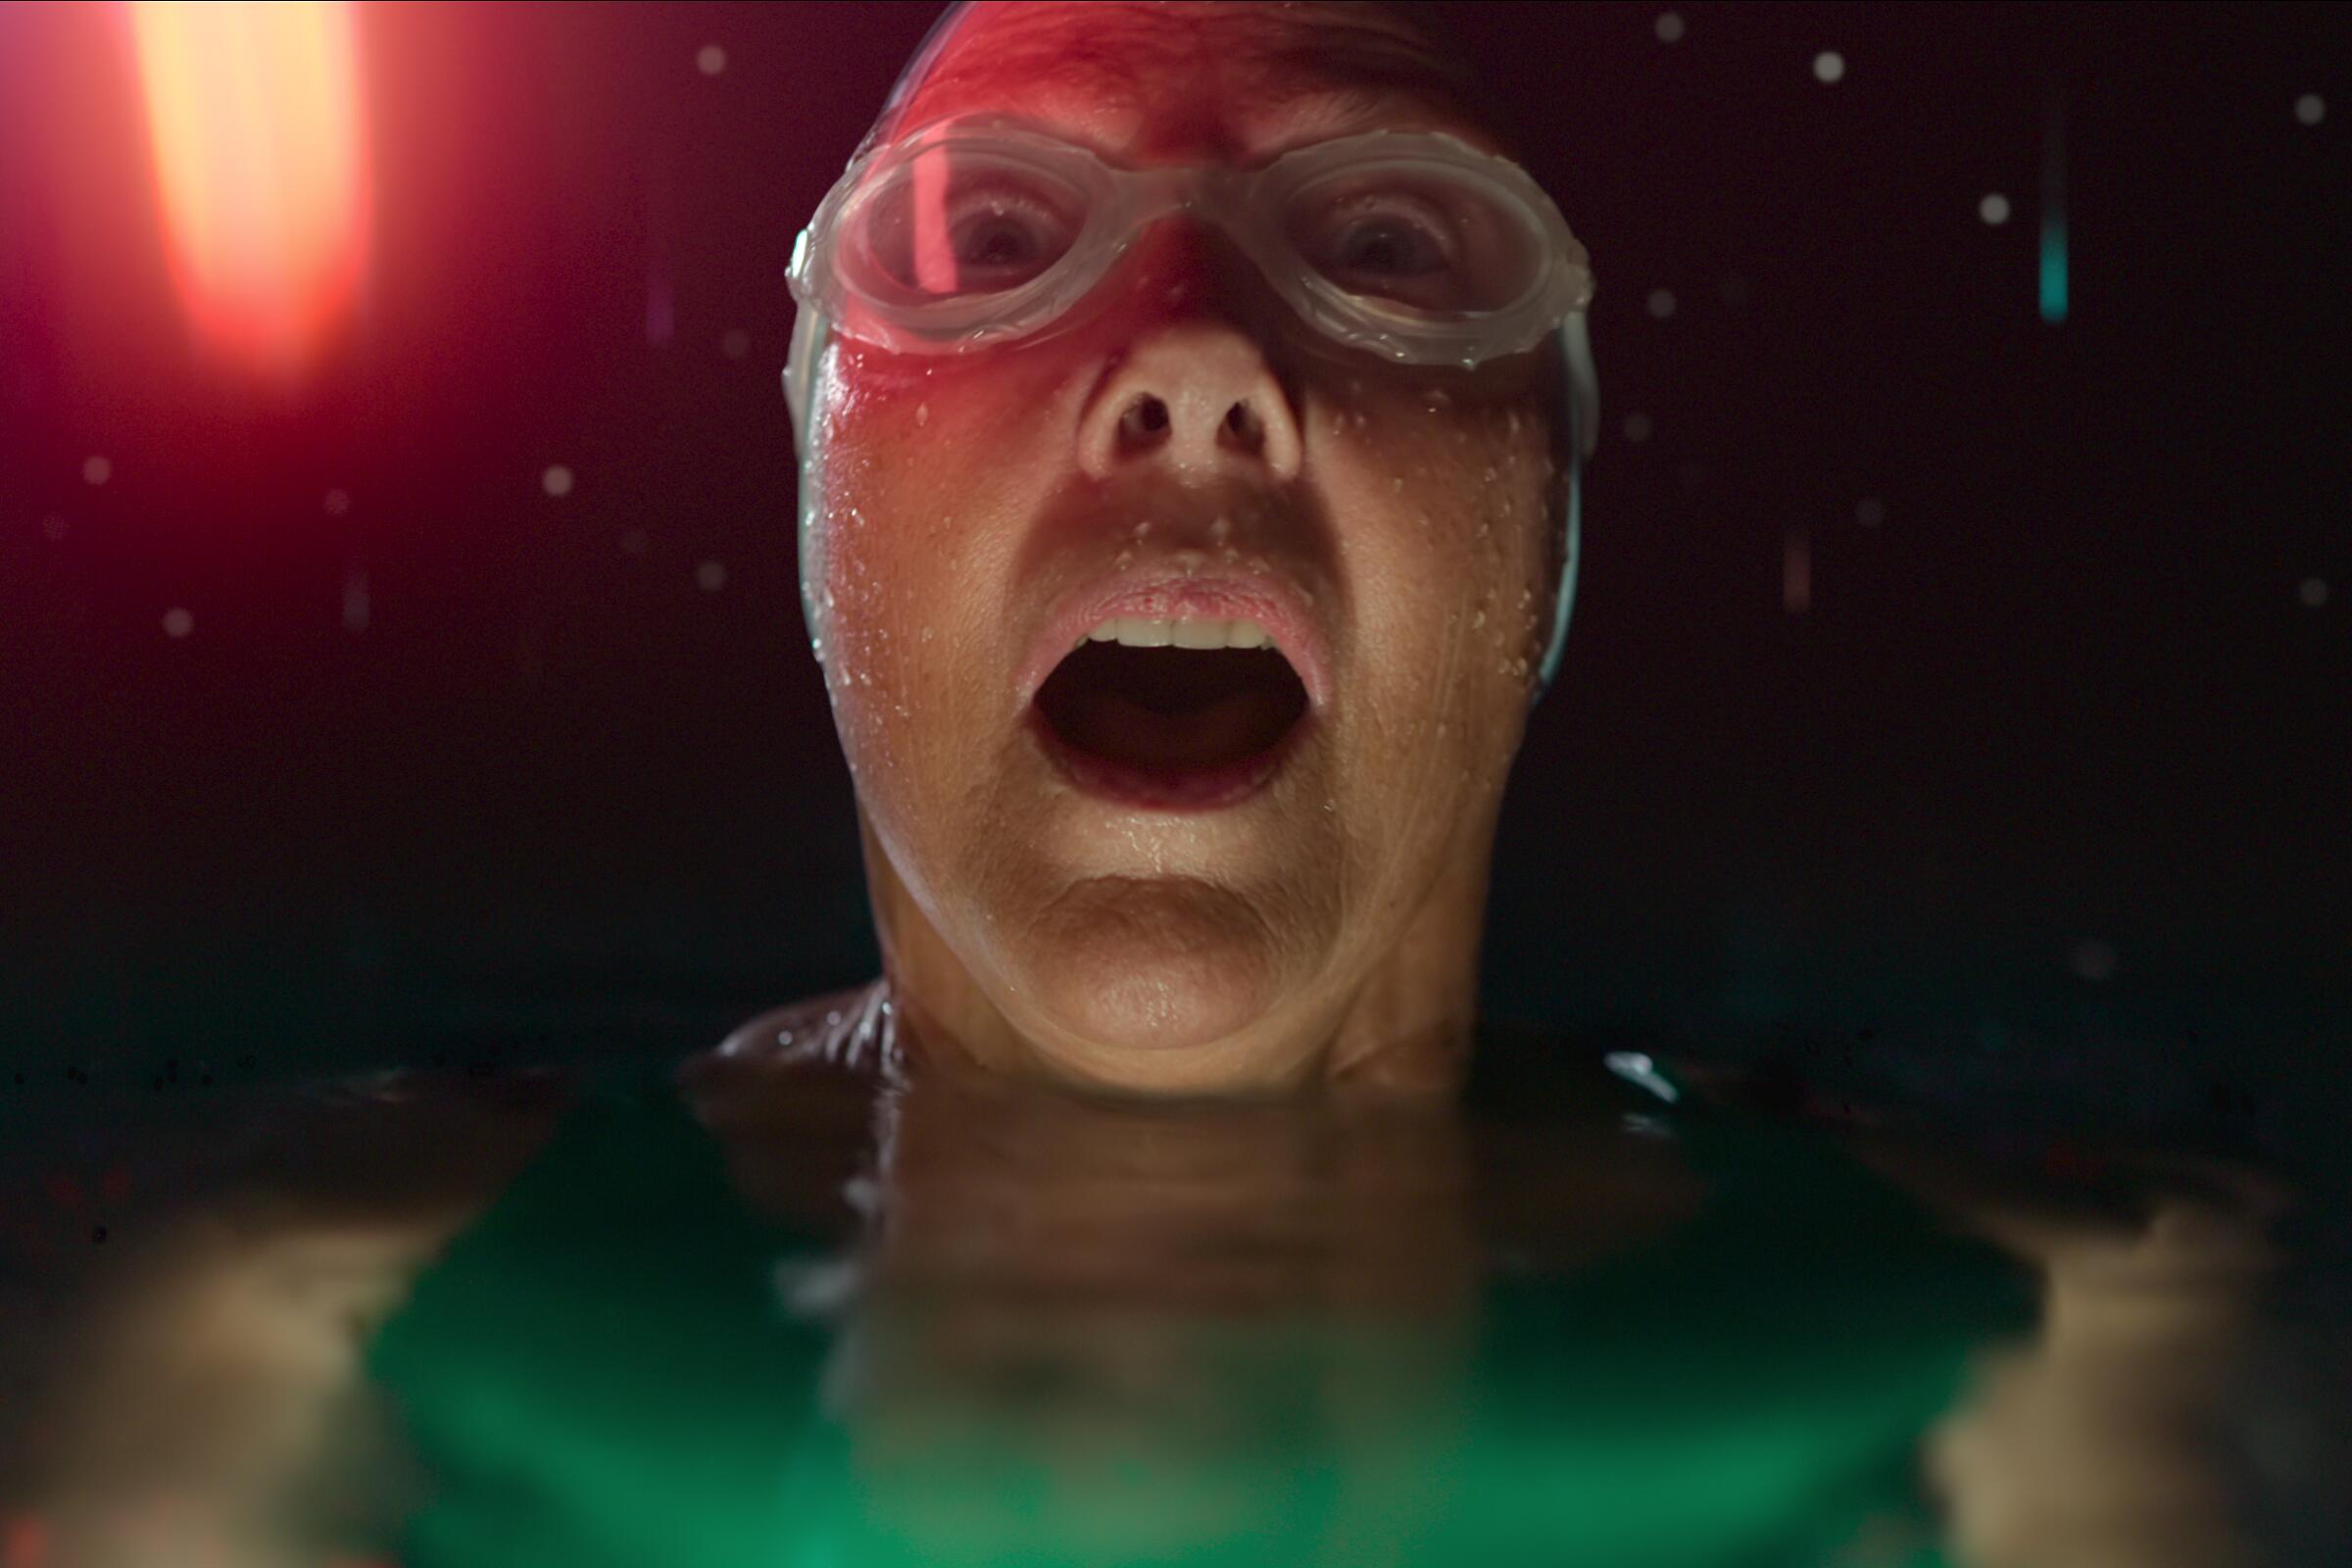 In a scene from "Nyad," Annette Bening lifts her head out of the water to see colorful lights descending from the night sky.